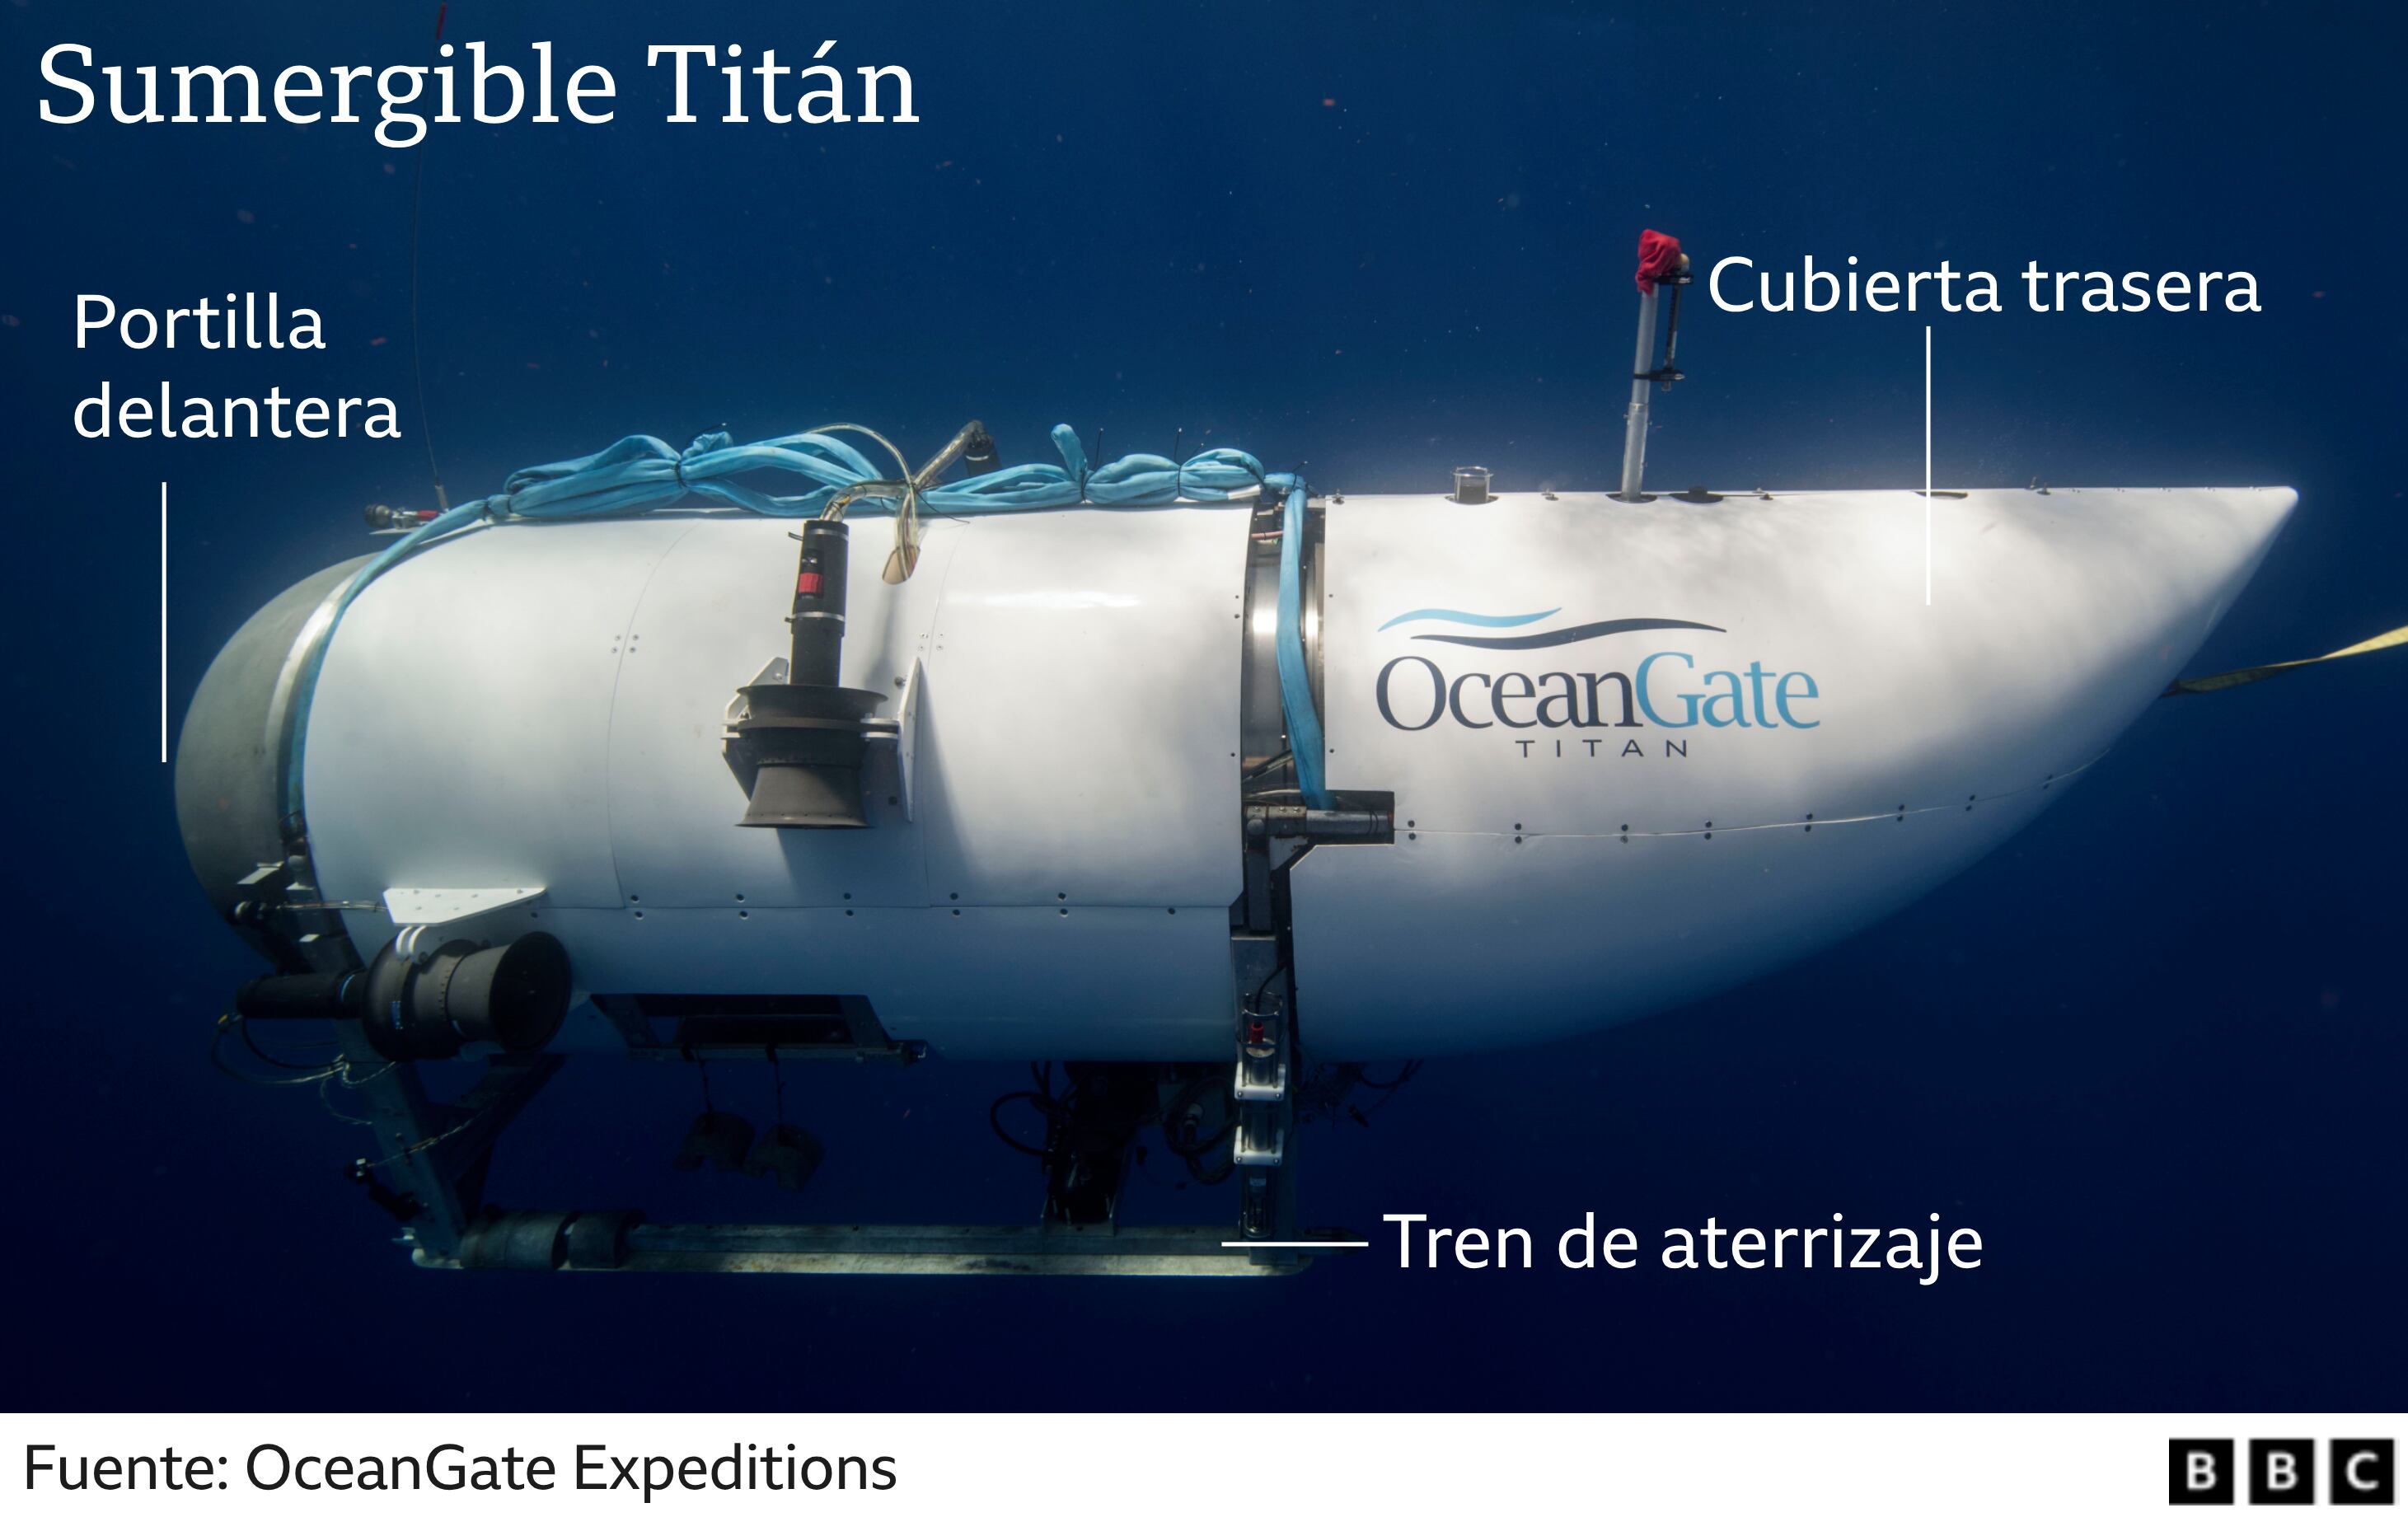 The Titan was designed to carry five people to depths of 4,000 meters under the sea.